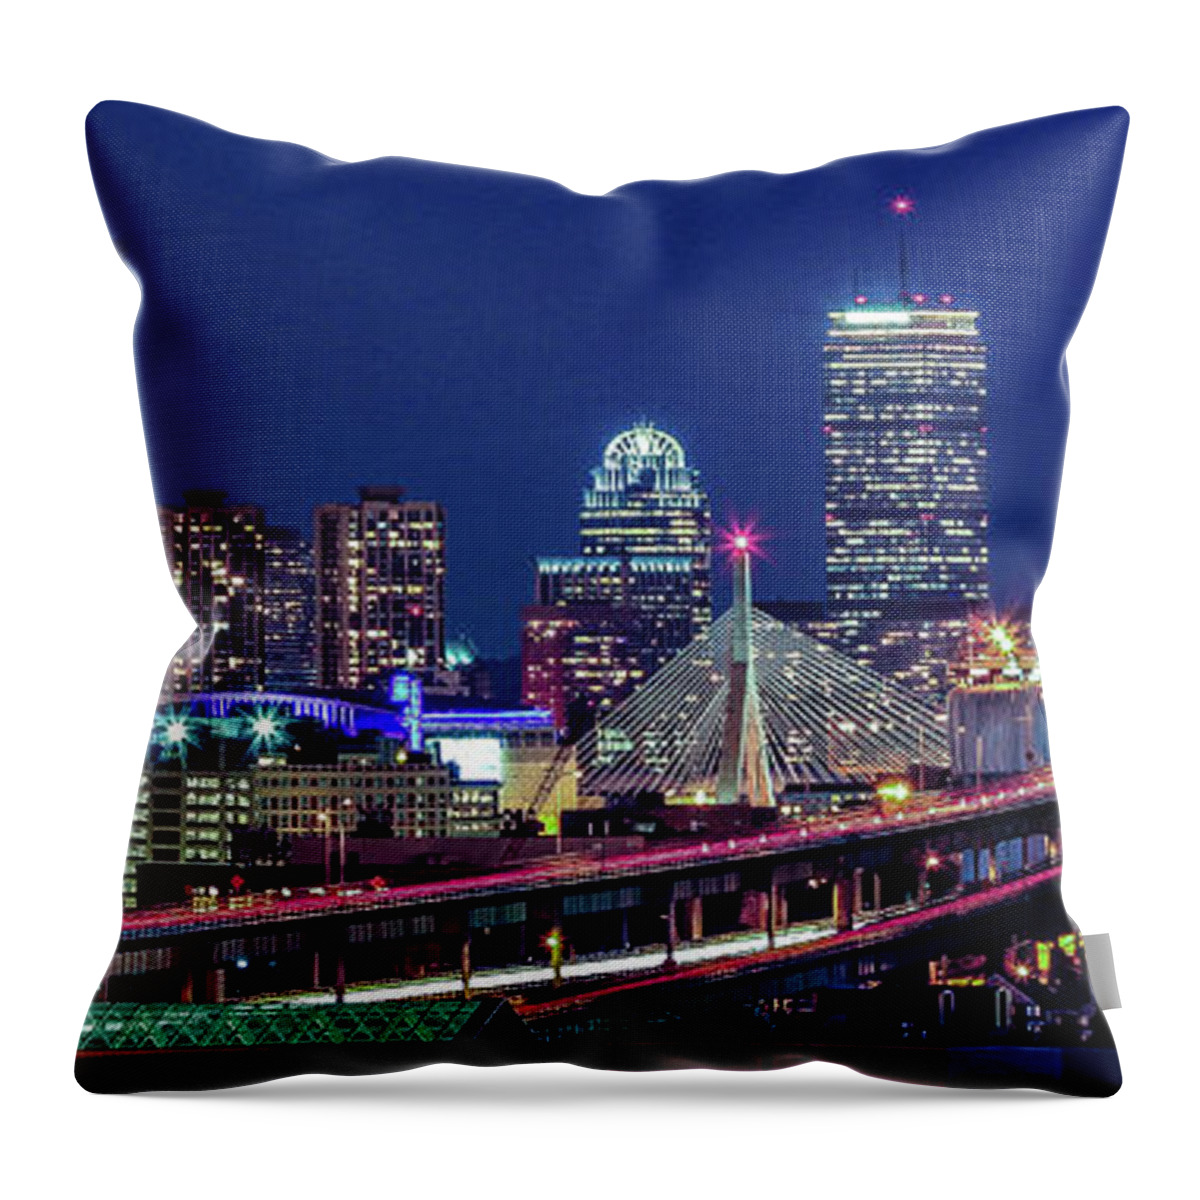 Downtown District Throw Pillow featuring the photograph Boston Blue Hour Skyline by (c) Swapan Jha